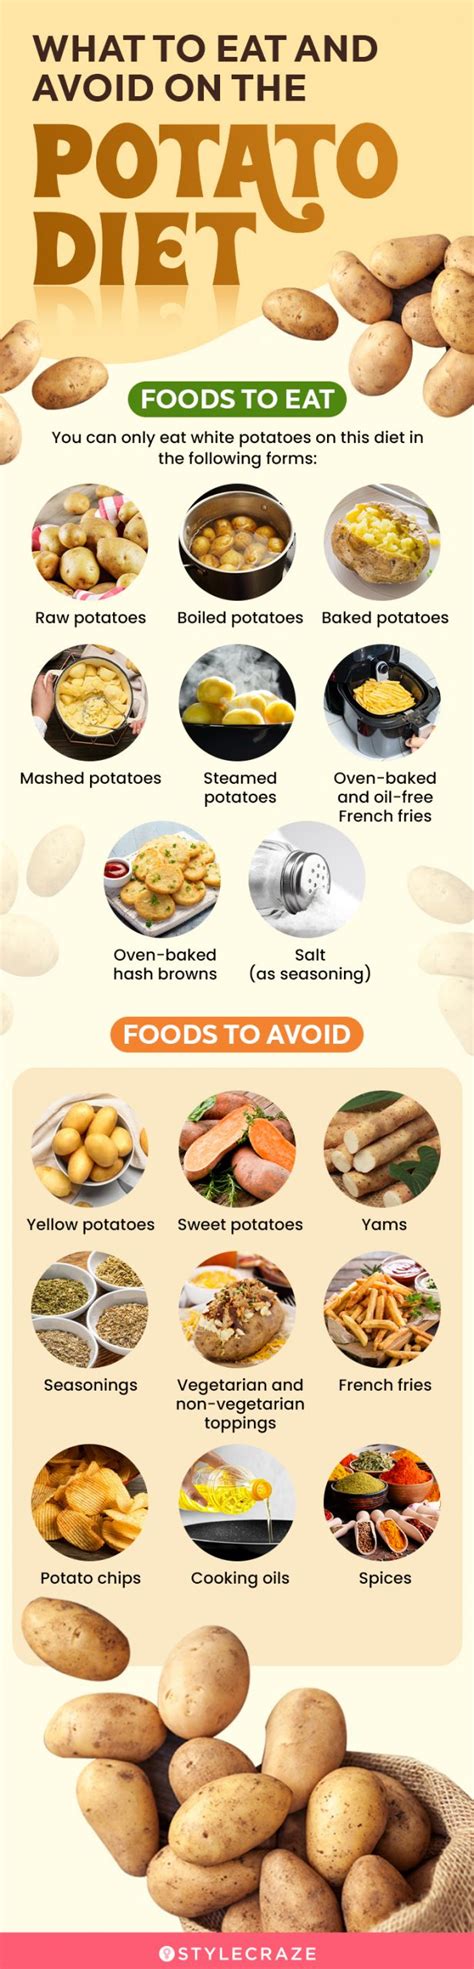 Should you avoid potatoes on a diet?